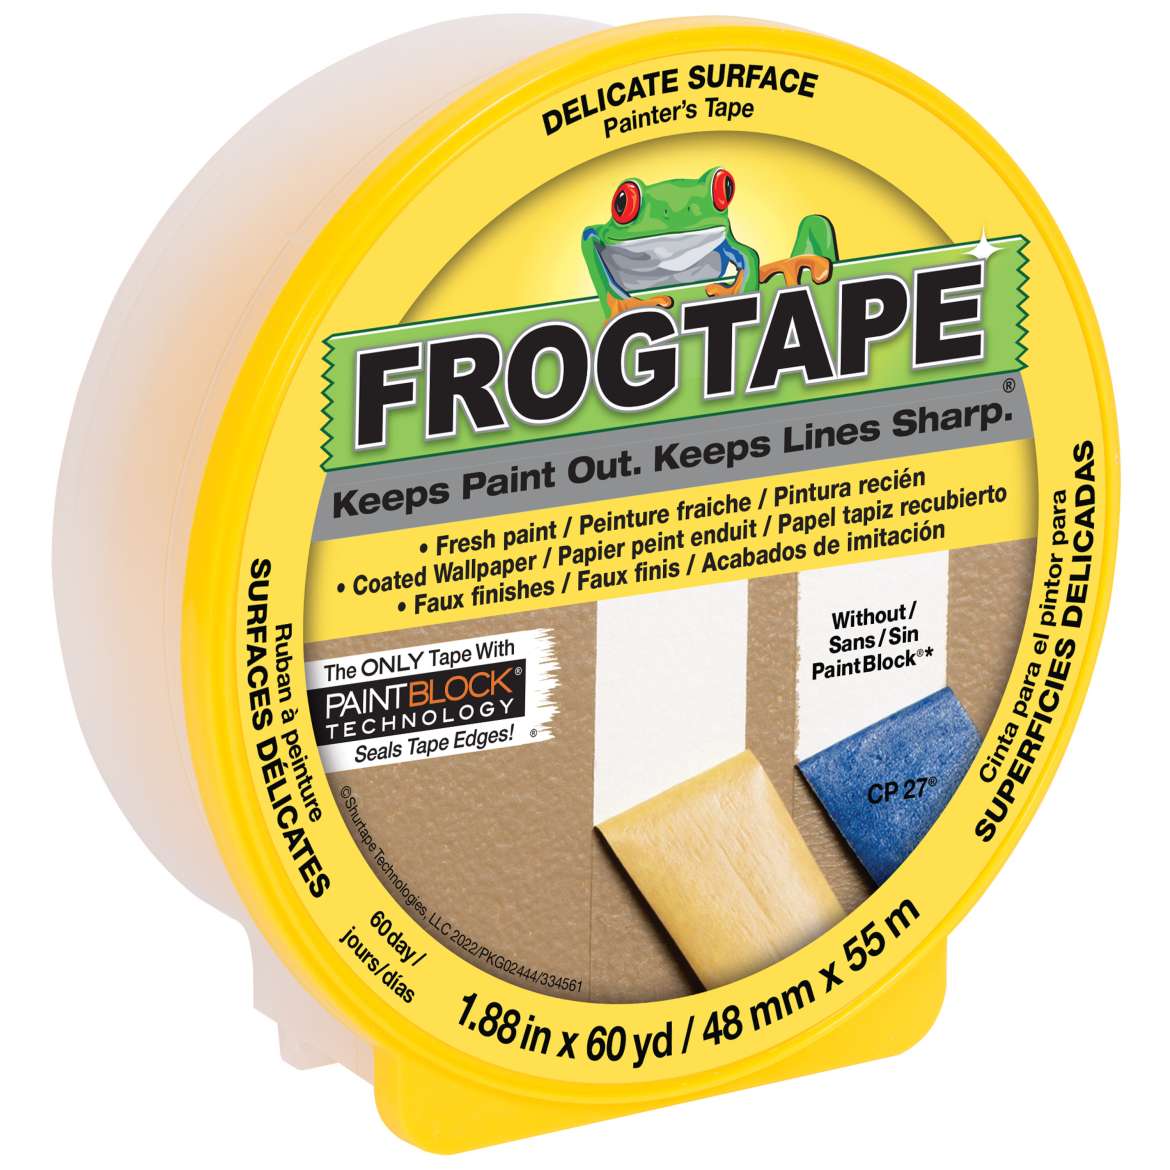 FrogTape® Delicate Surface Painter's Tape - Yellow, 1.88 in. x 60 yd.